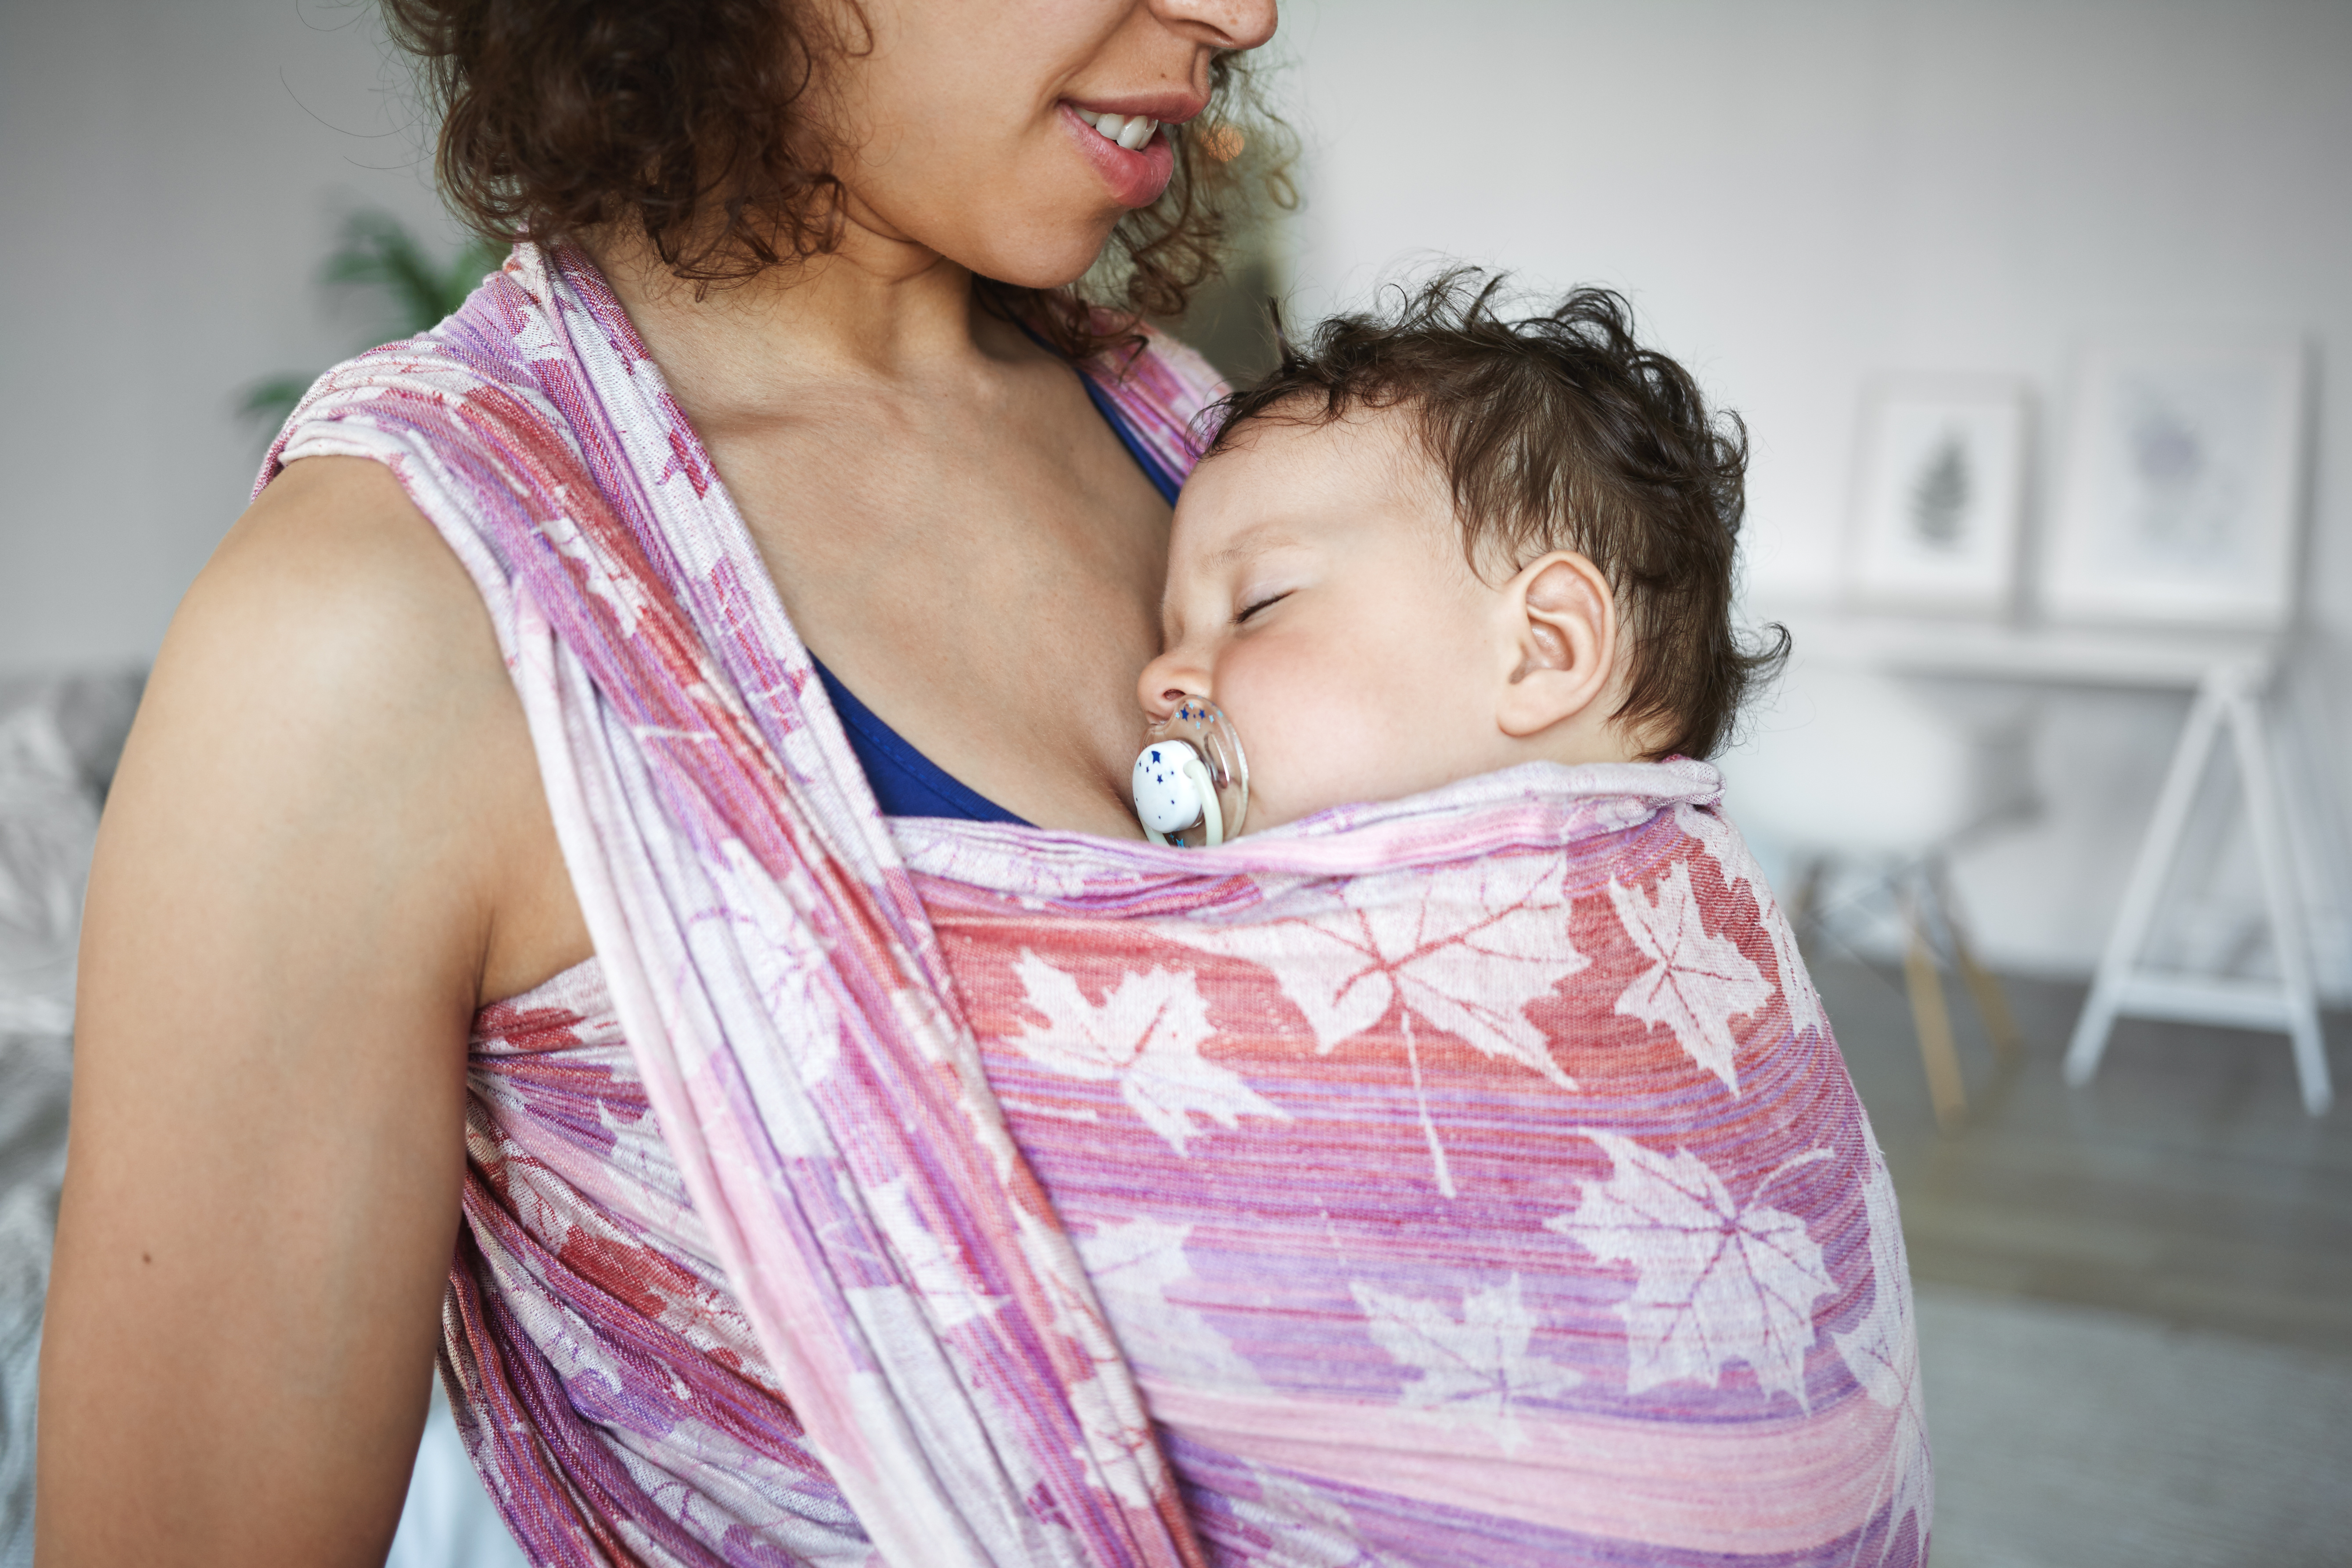 A mother wears her sleeping baby in a sling.